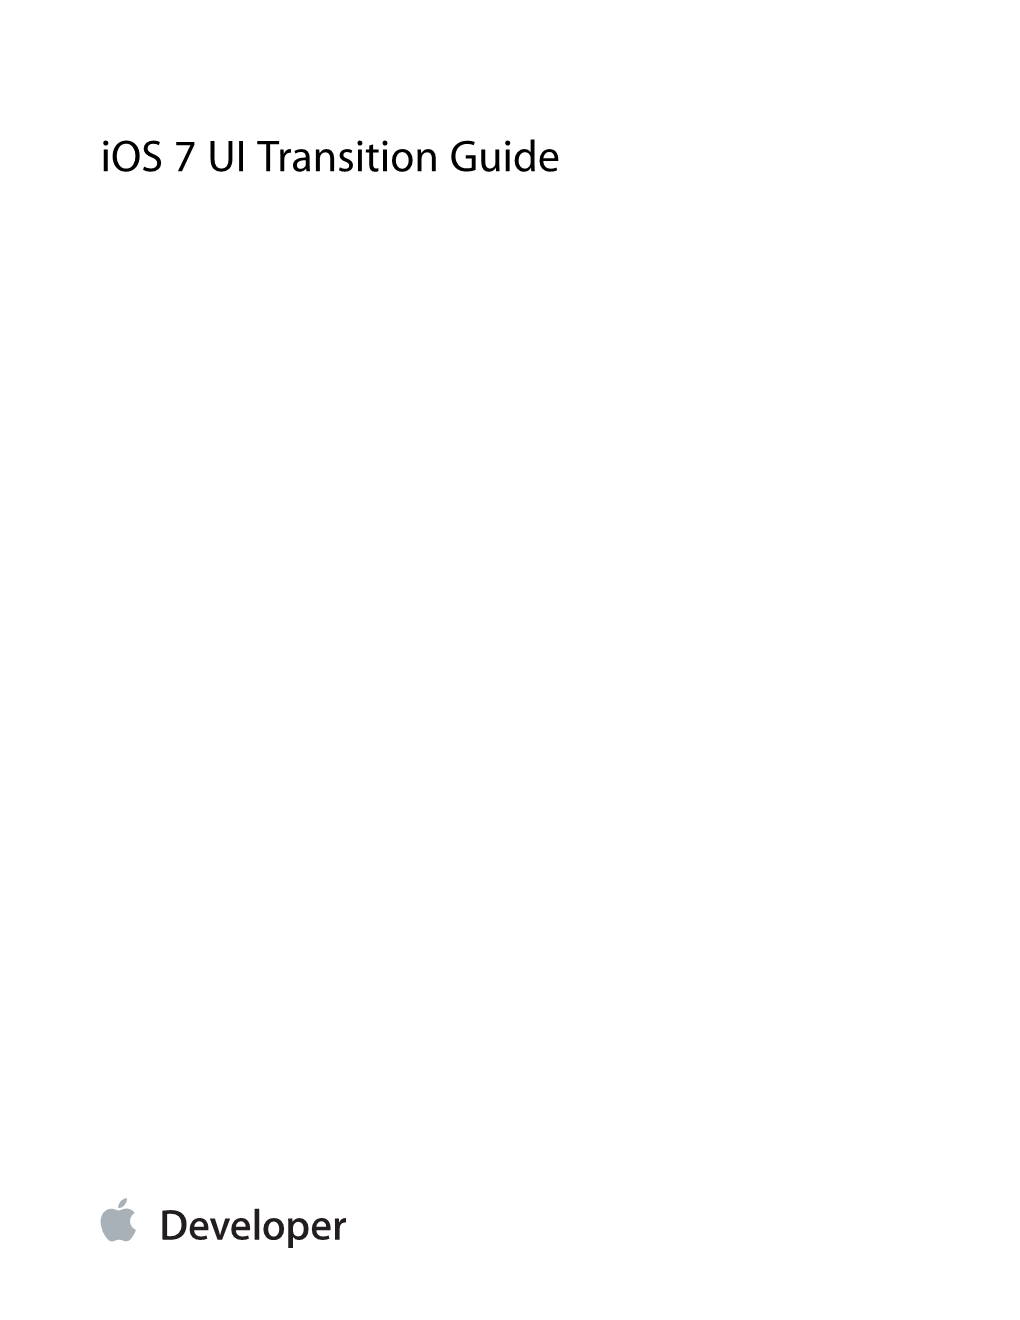 Ios 7 UI Transition Guide Contents